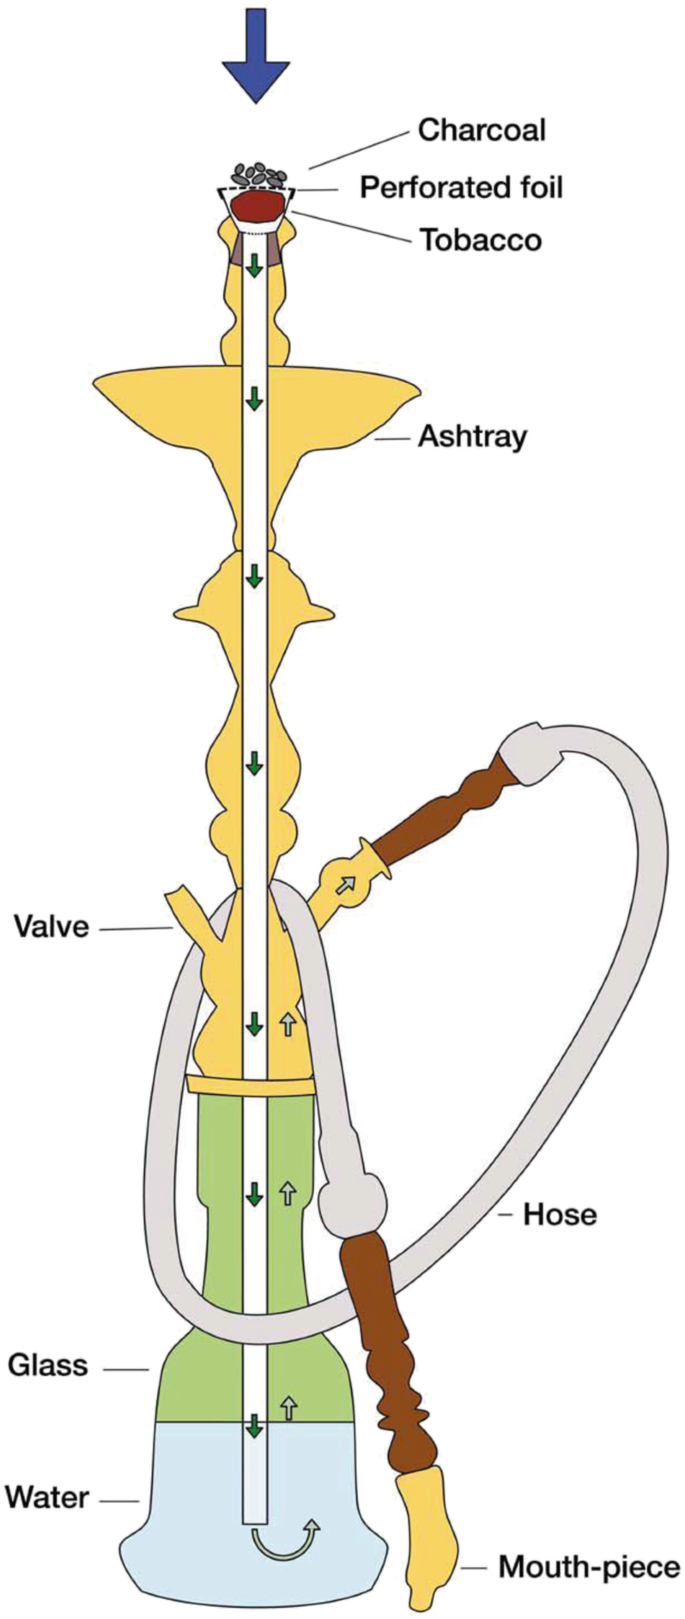 Annotated figure of a waterpipe smoking device.